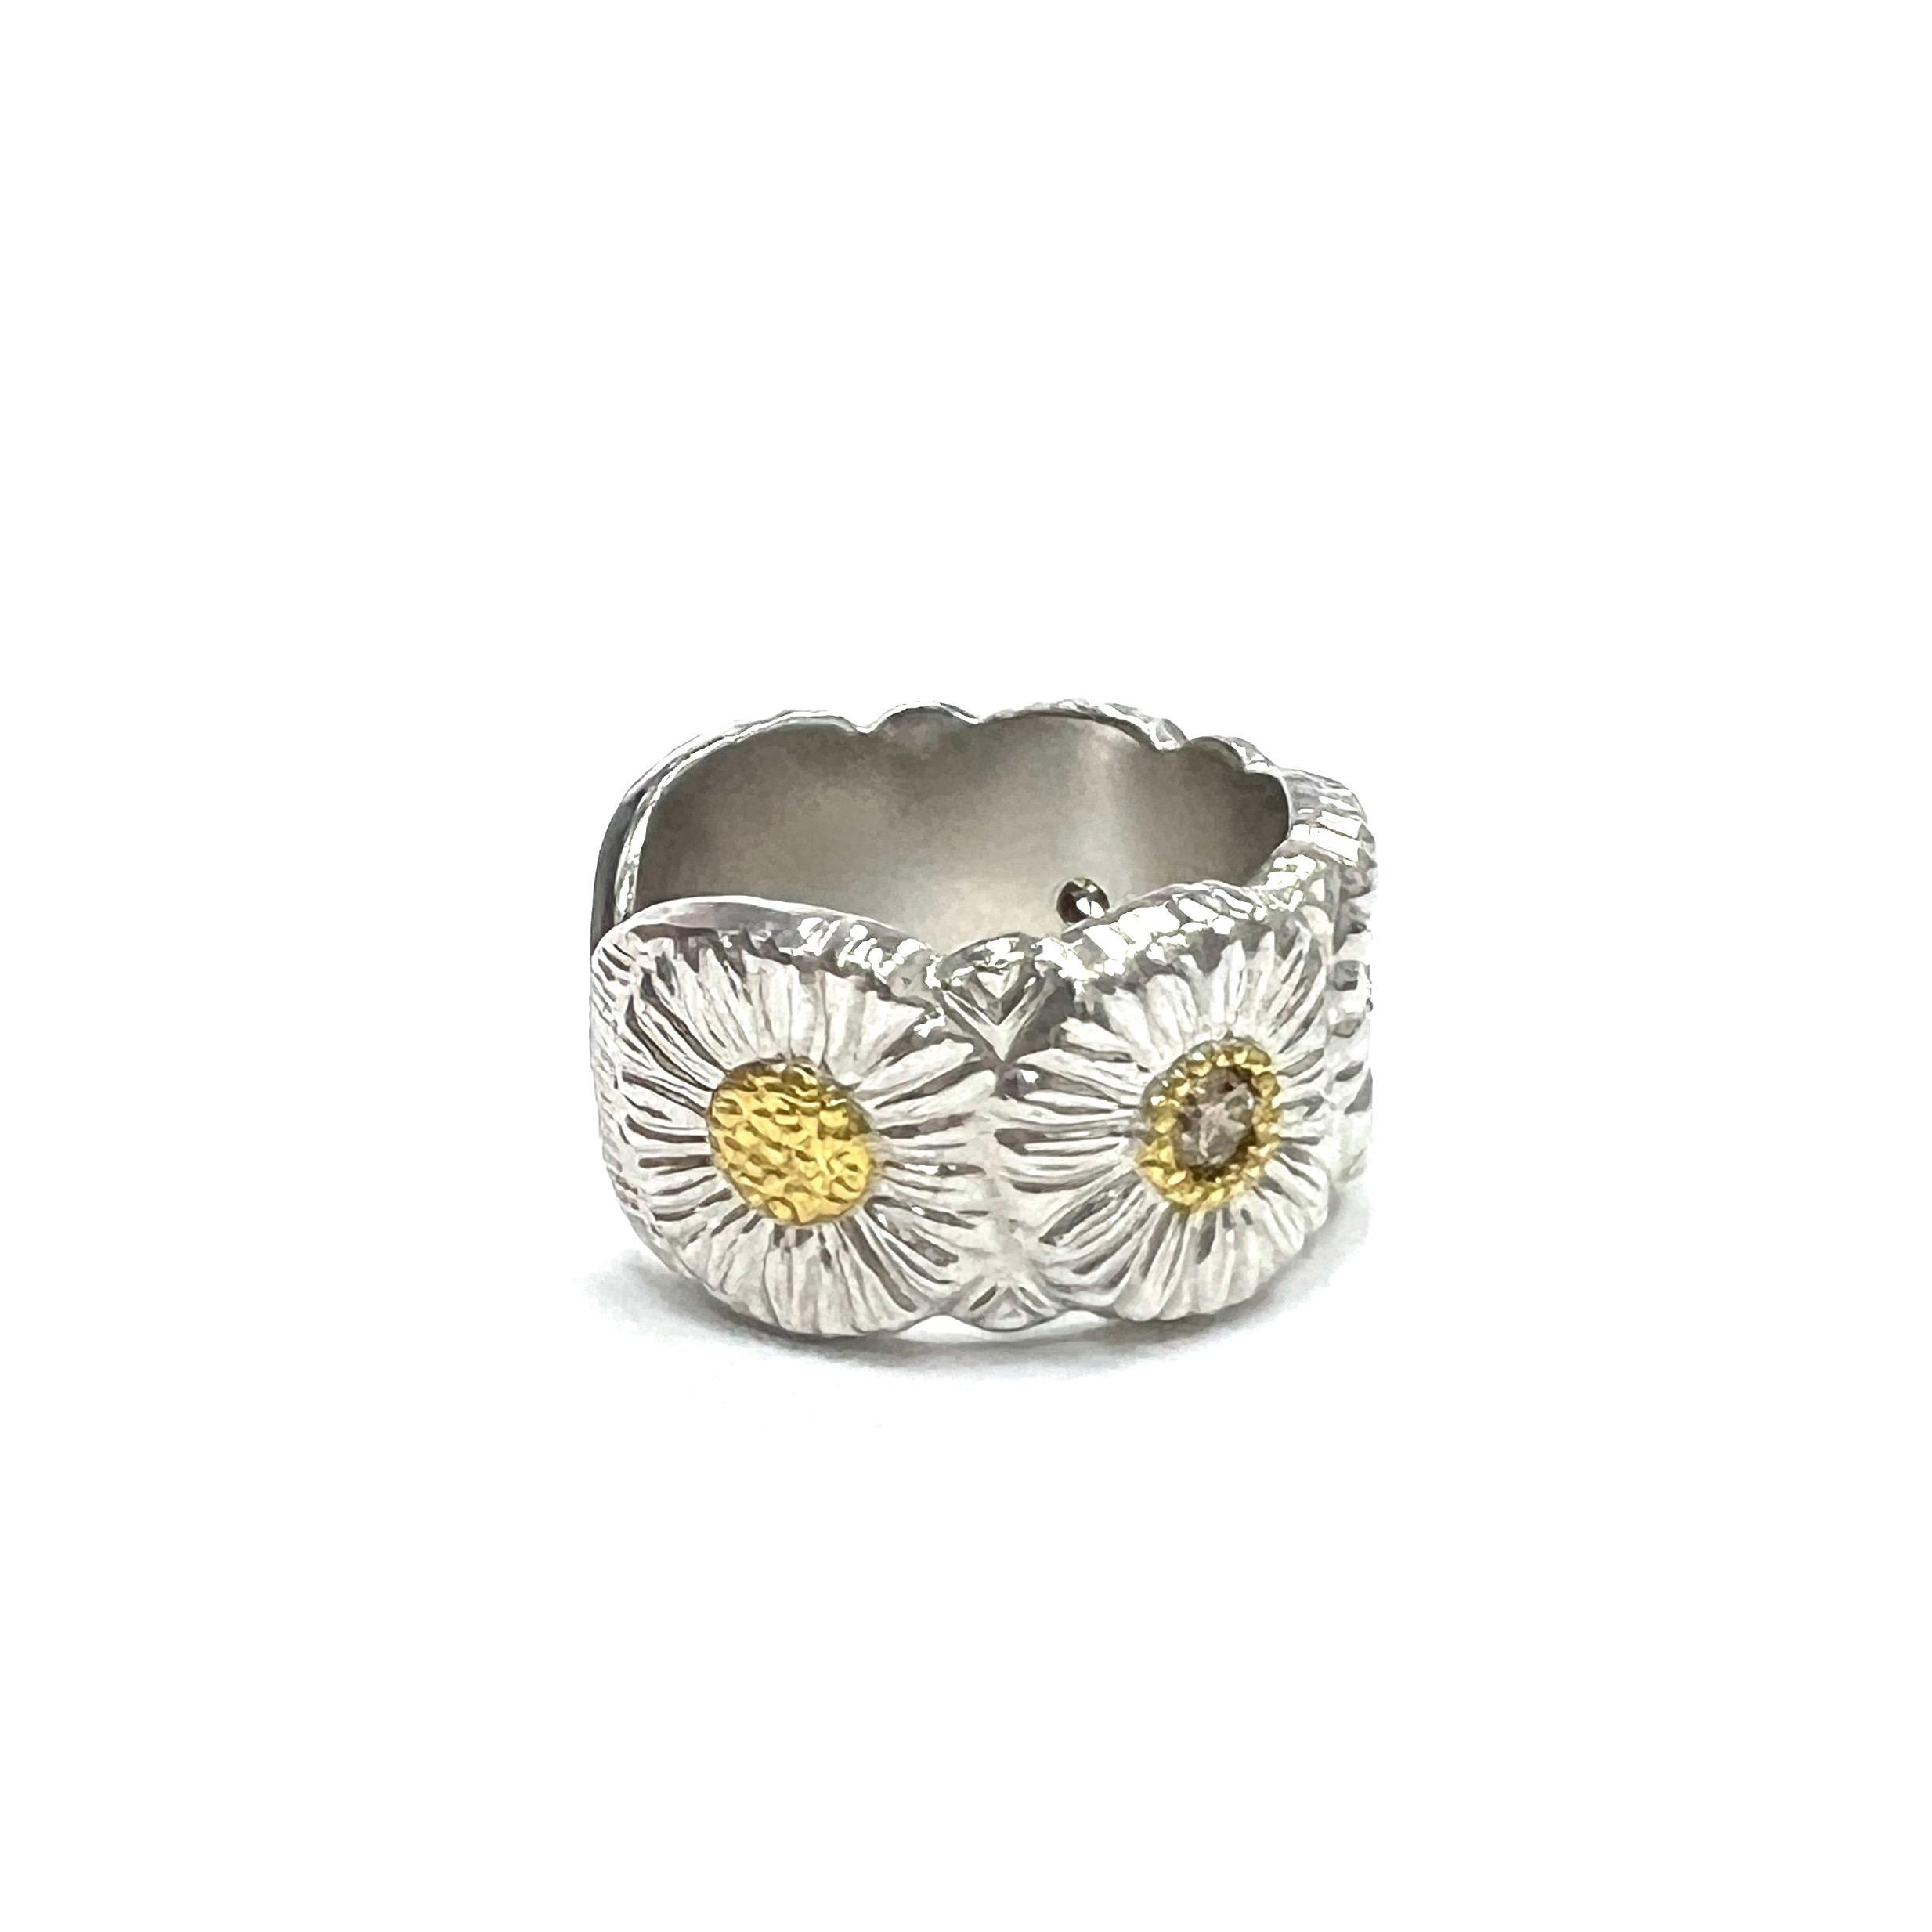 Buccellati Blossoms Daisy Diamond Sterling Silver Ring, Italian

Daisy flowers design made of sterling silver, bezel-set round-cut diamonds of approximately 0.24 carat; marked Buccellati, Italy, 925, Sterling

Size: 6 US; width 1 cm
Total weight: